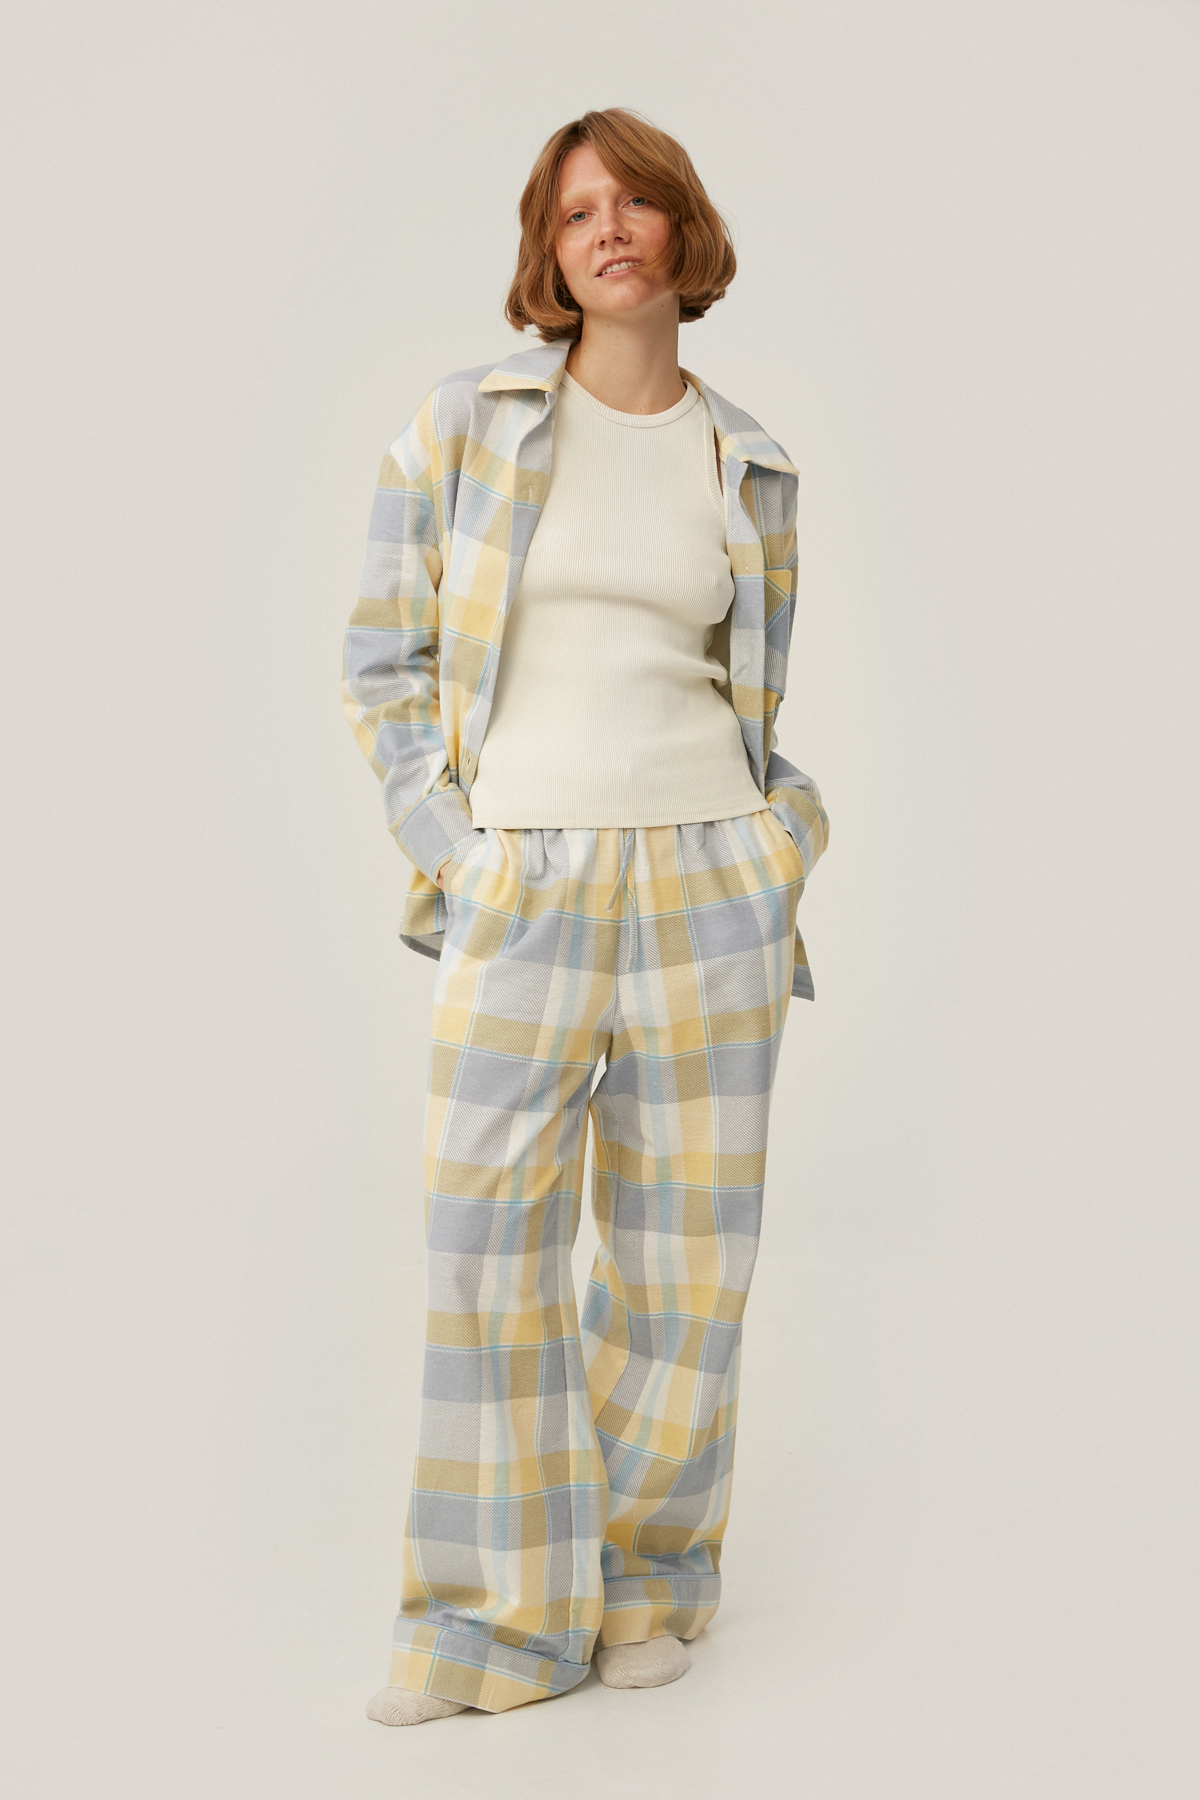 Pajama flanelette loose-fit pants in yellow and blue check, photo 1